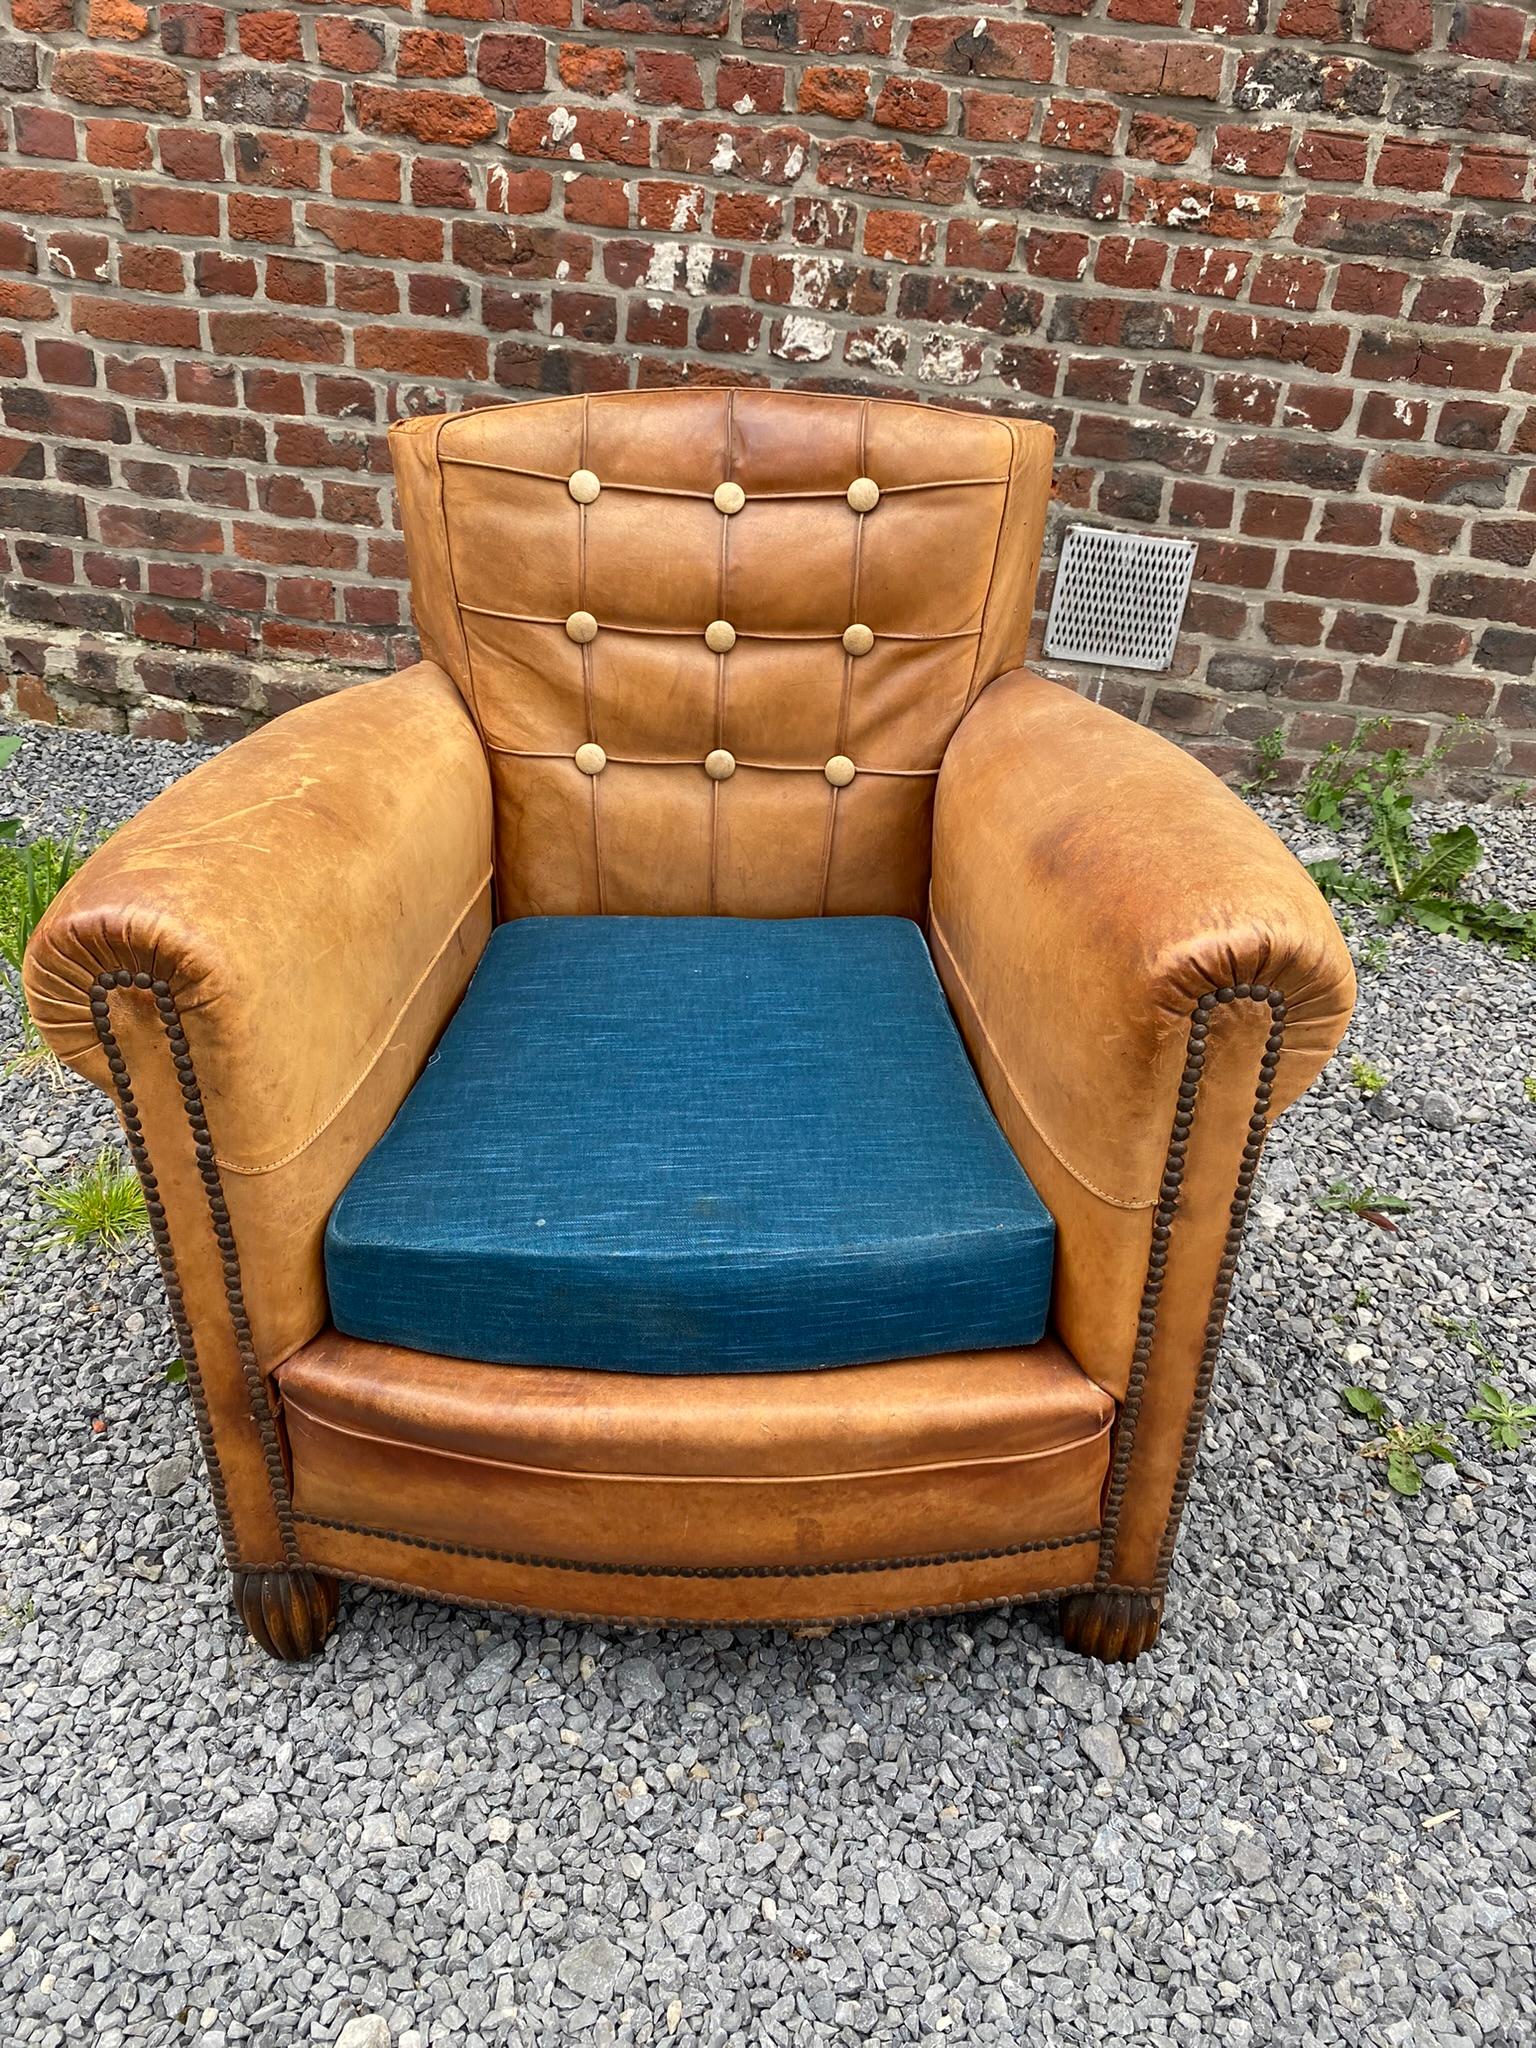 Art Deco Armchairs Covered in Leather, circa 1930 For Sale 2